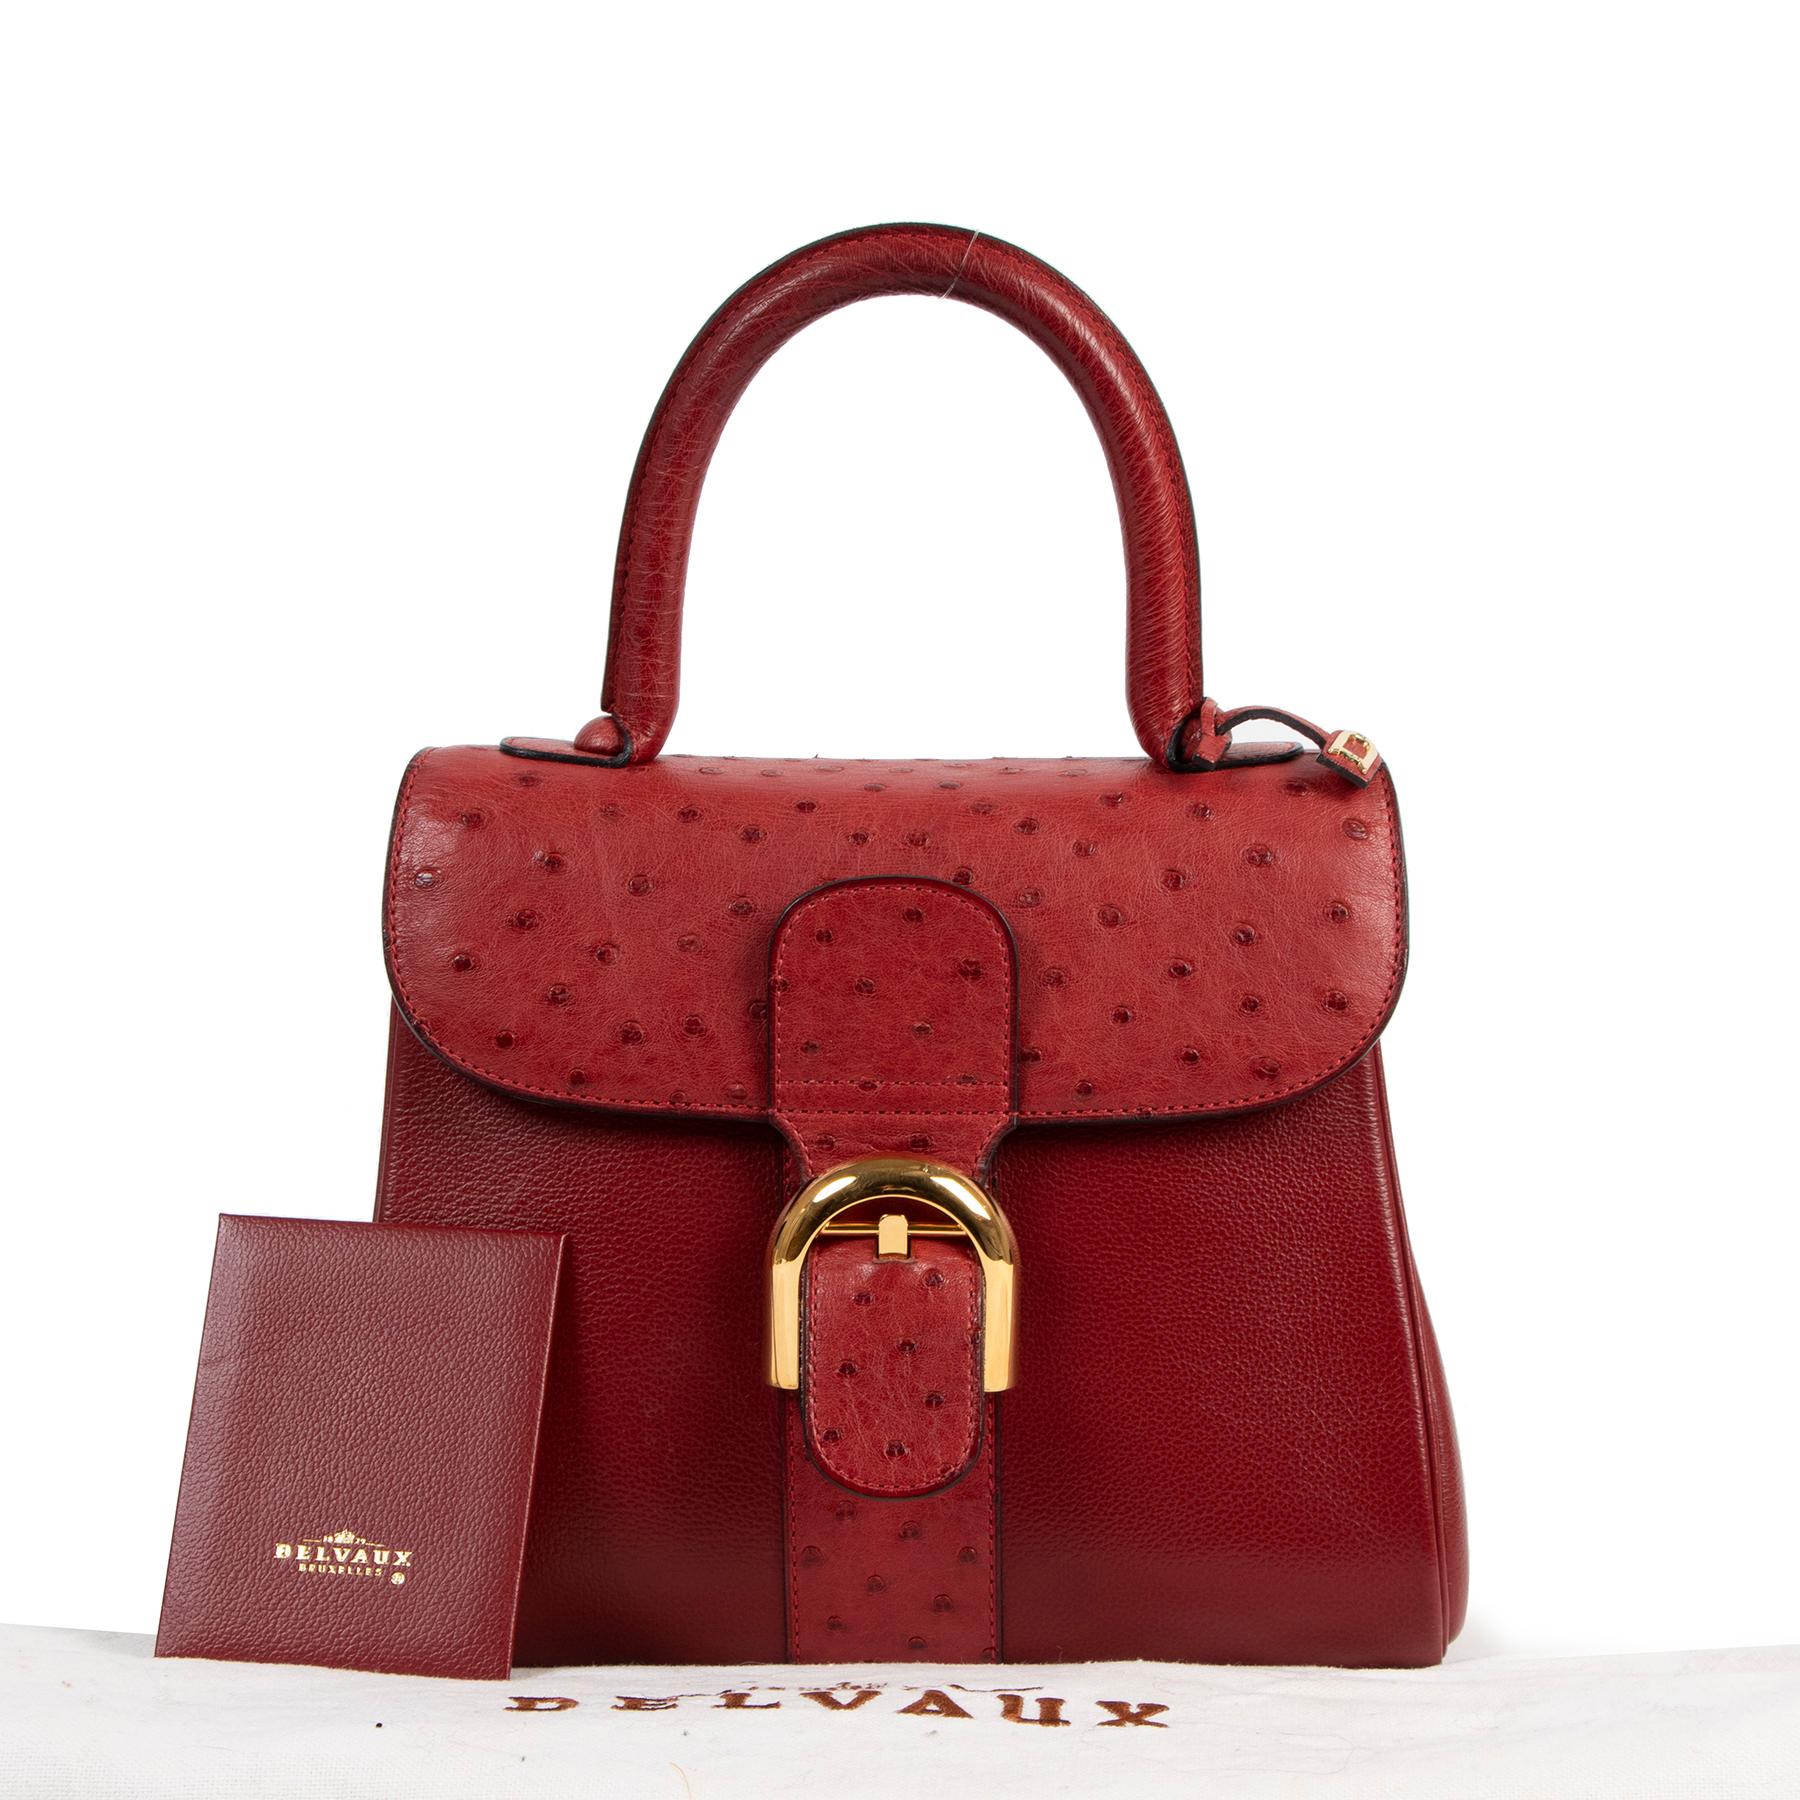 Very good condition

Delvaux Bordeaux Ostrich Brillant PM Handbag 

Designed by la maison Delvaux in 1958, the Brillant reflects the innovation of that era. This discontinued and hard-to-get PM model is the perfect size for daily use. Covered in